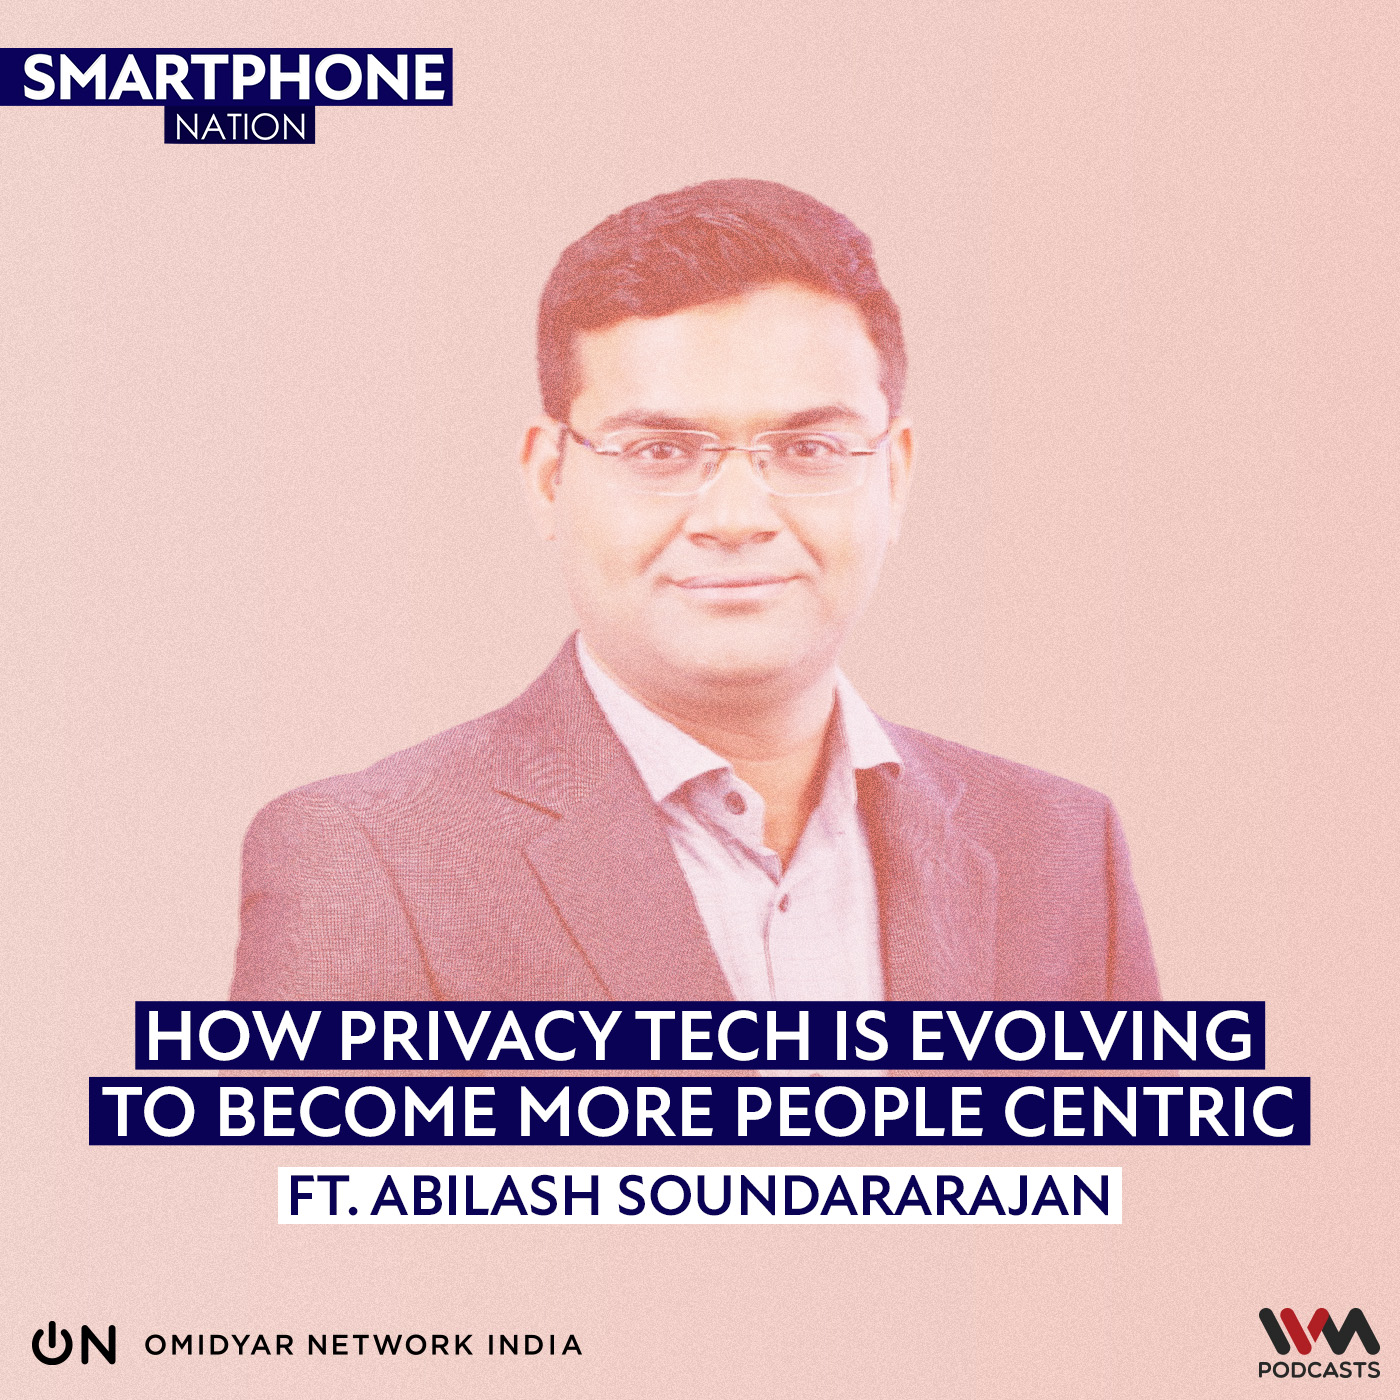 How Privacy Tech is Evolving to become more People Centric ft. Abilash Soundararajan